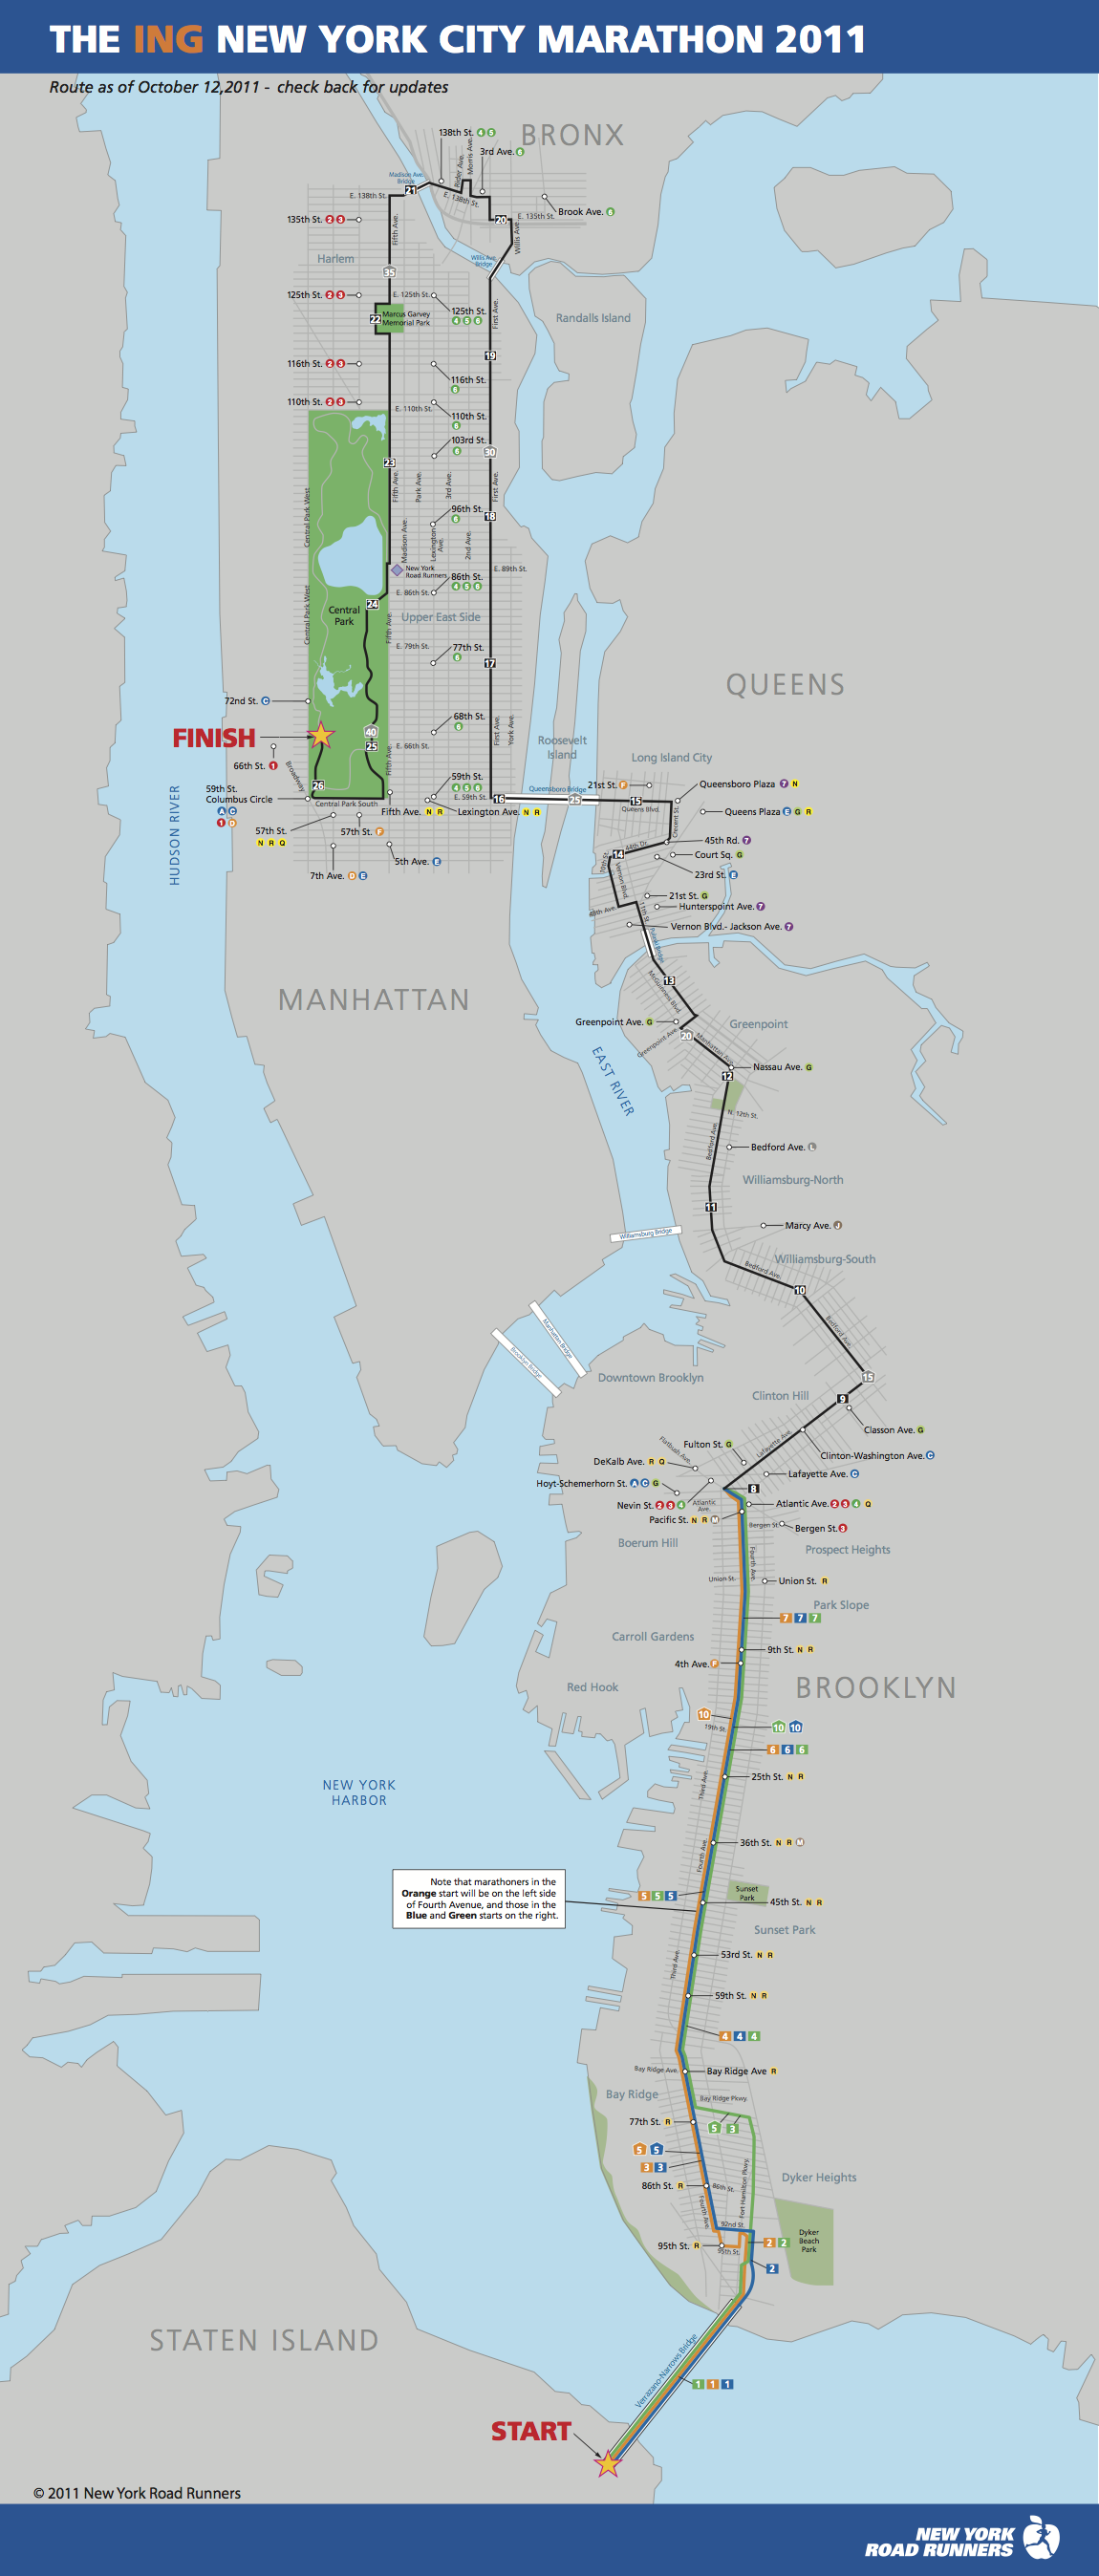 Coursemap for the 2011 NYC Marathon